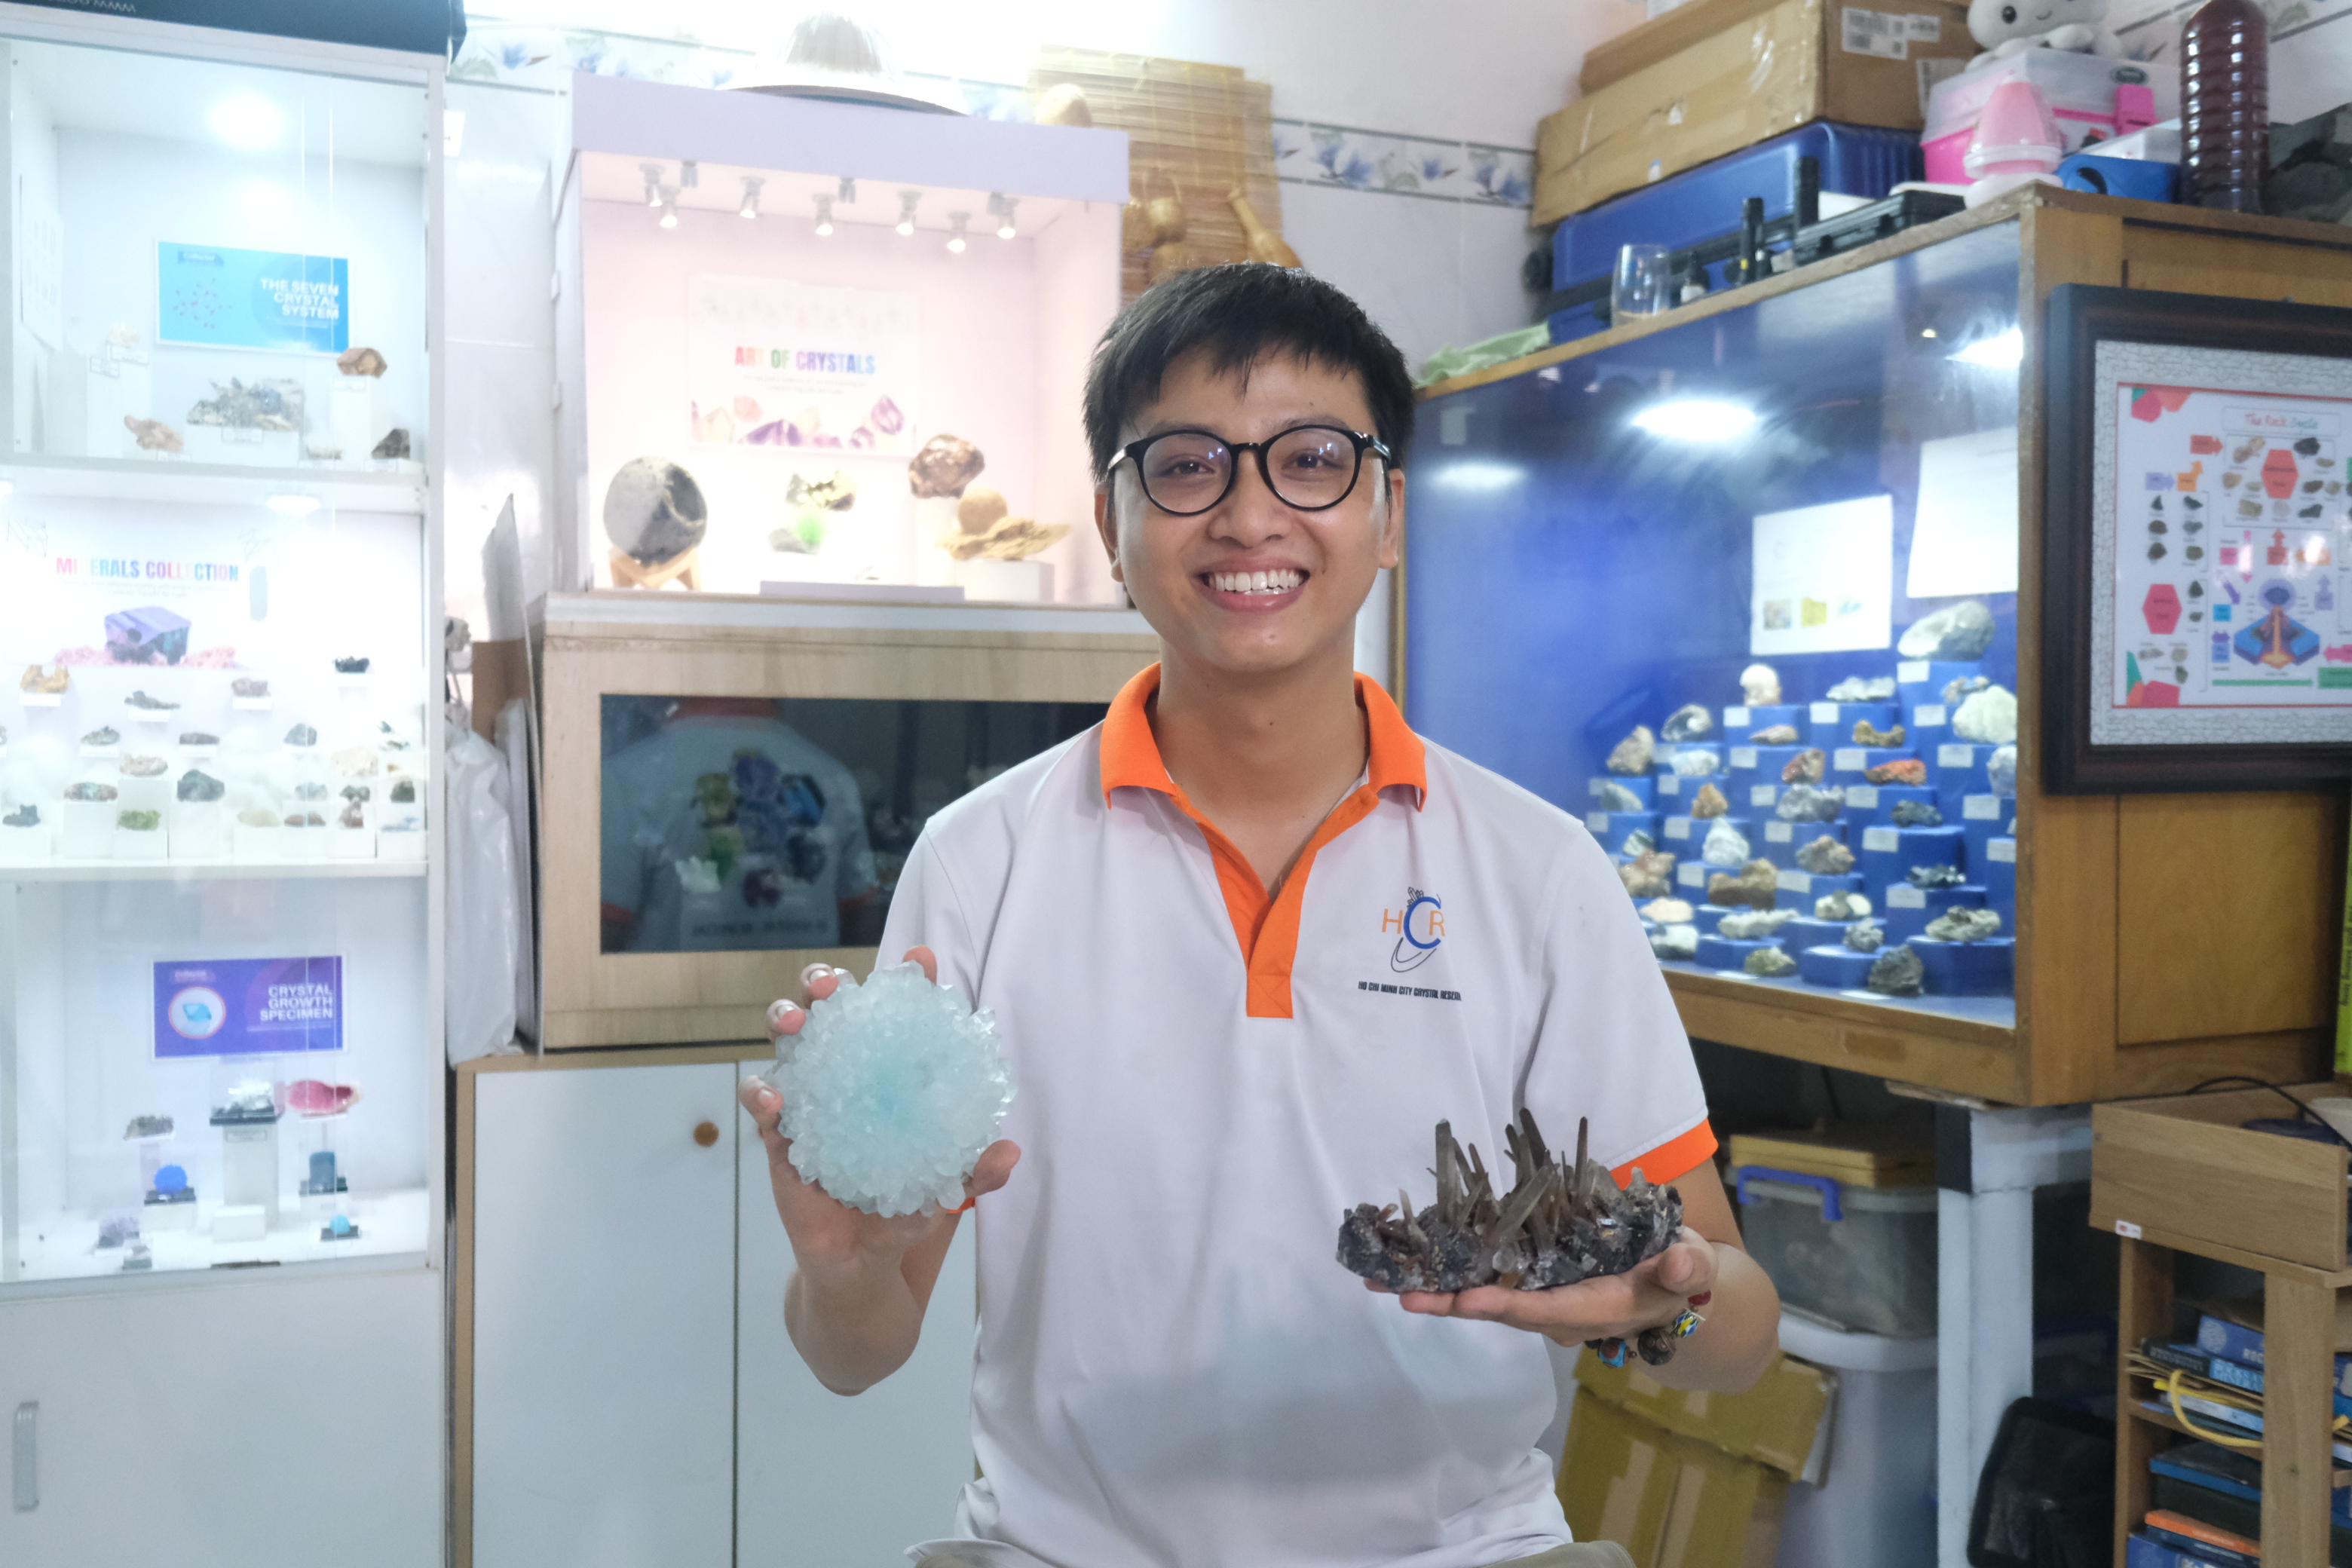 Nguyen Ba Tuyen poses with two pieces of crystals with his collection in the background at his home in Ho Chi Minh City. Photo: Ngoc Phuong / Tuoi Tre News